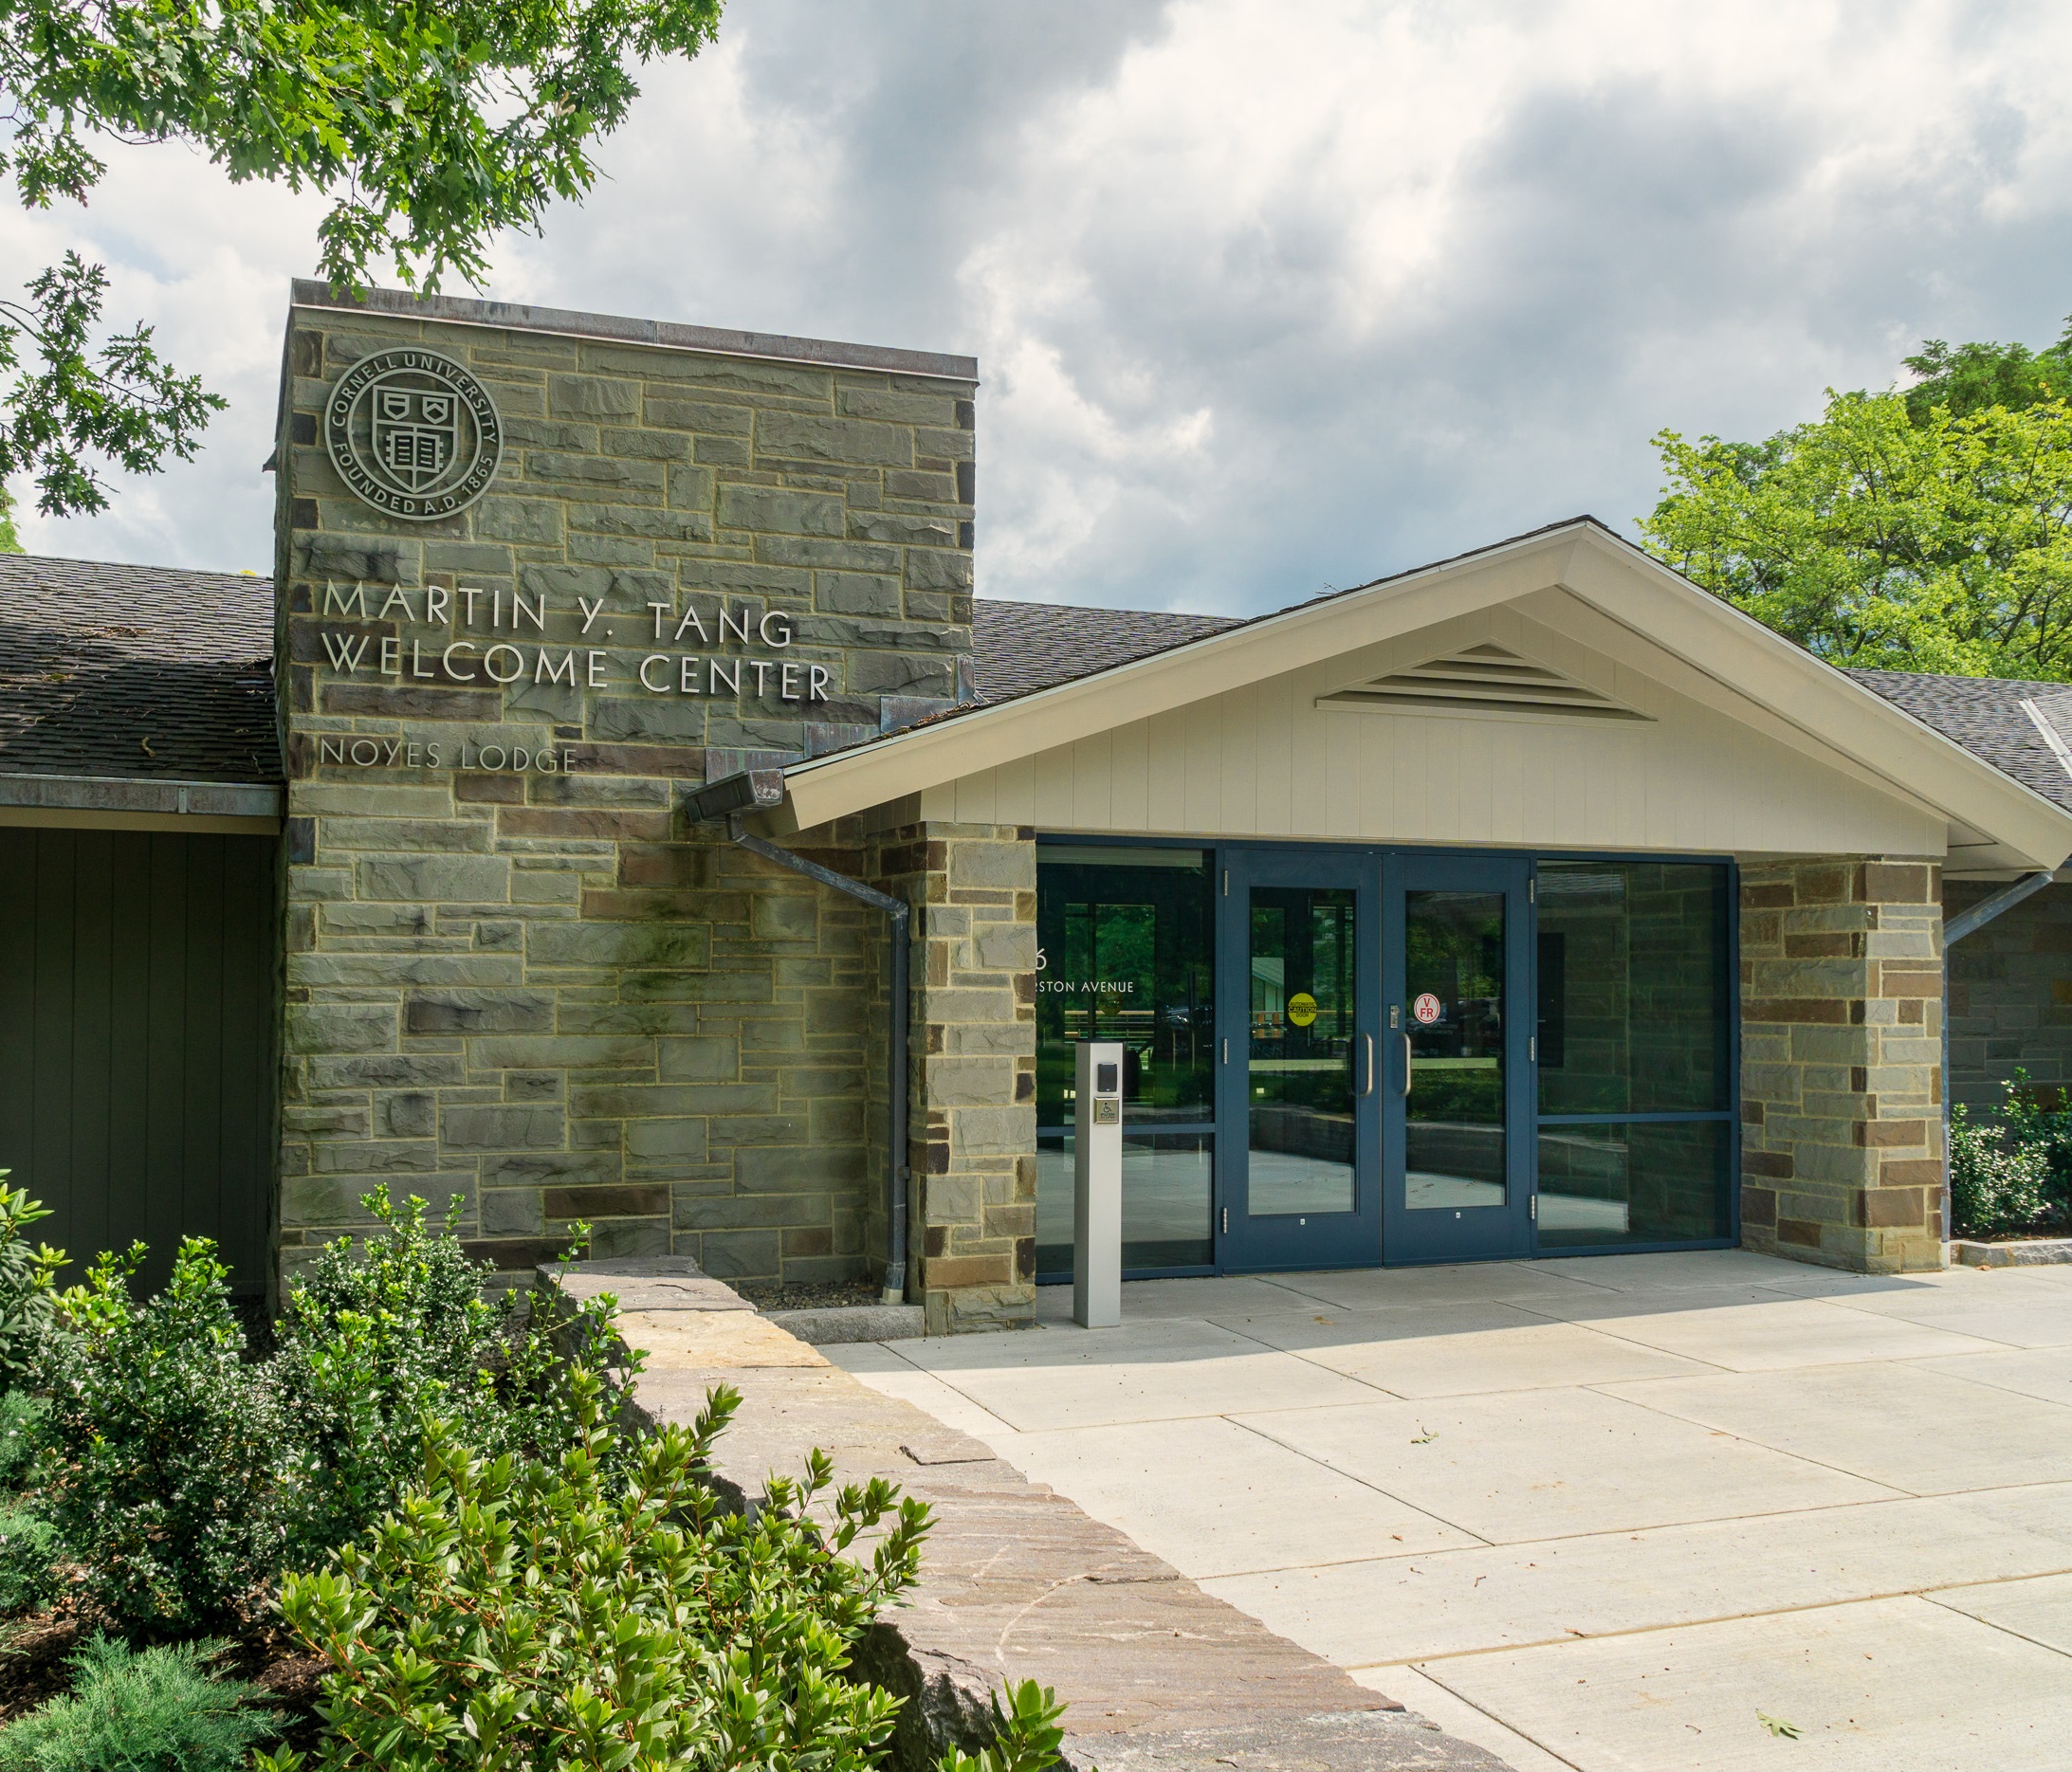 Martin Y. Tang Welcome Center